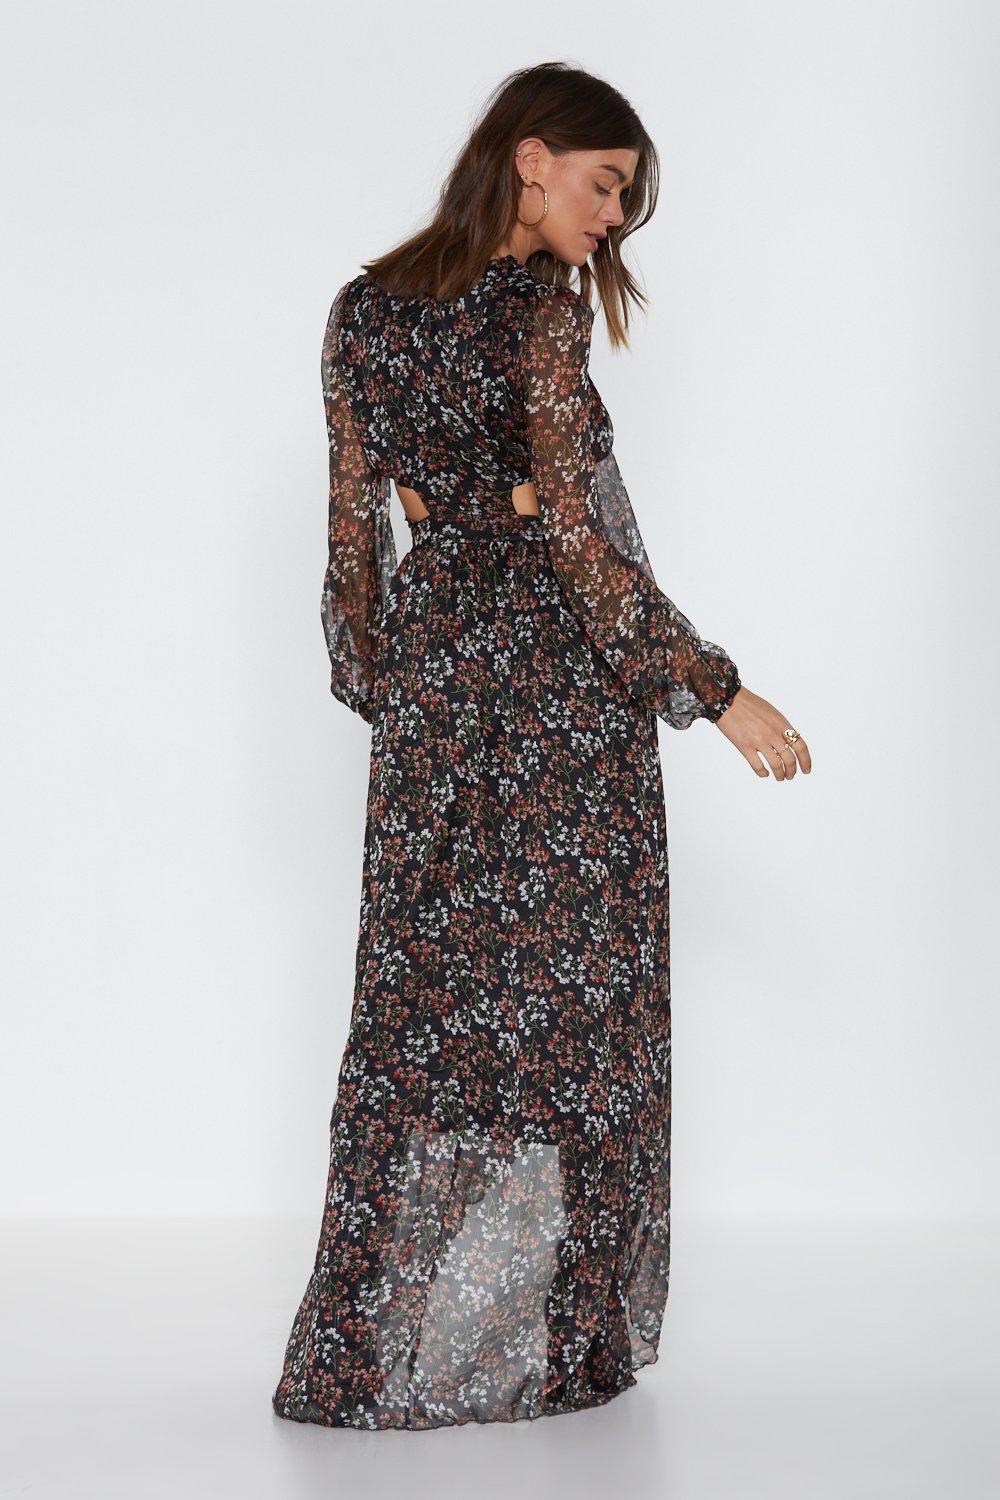 She's Blooming Floral Cut-Out Maxi Dress – Ellesh Couture